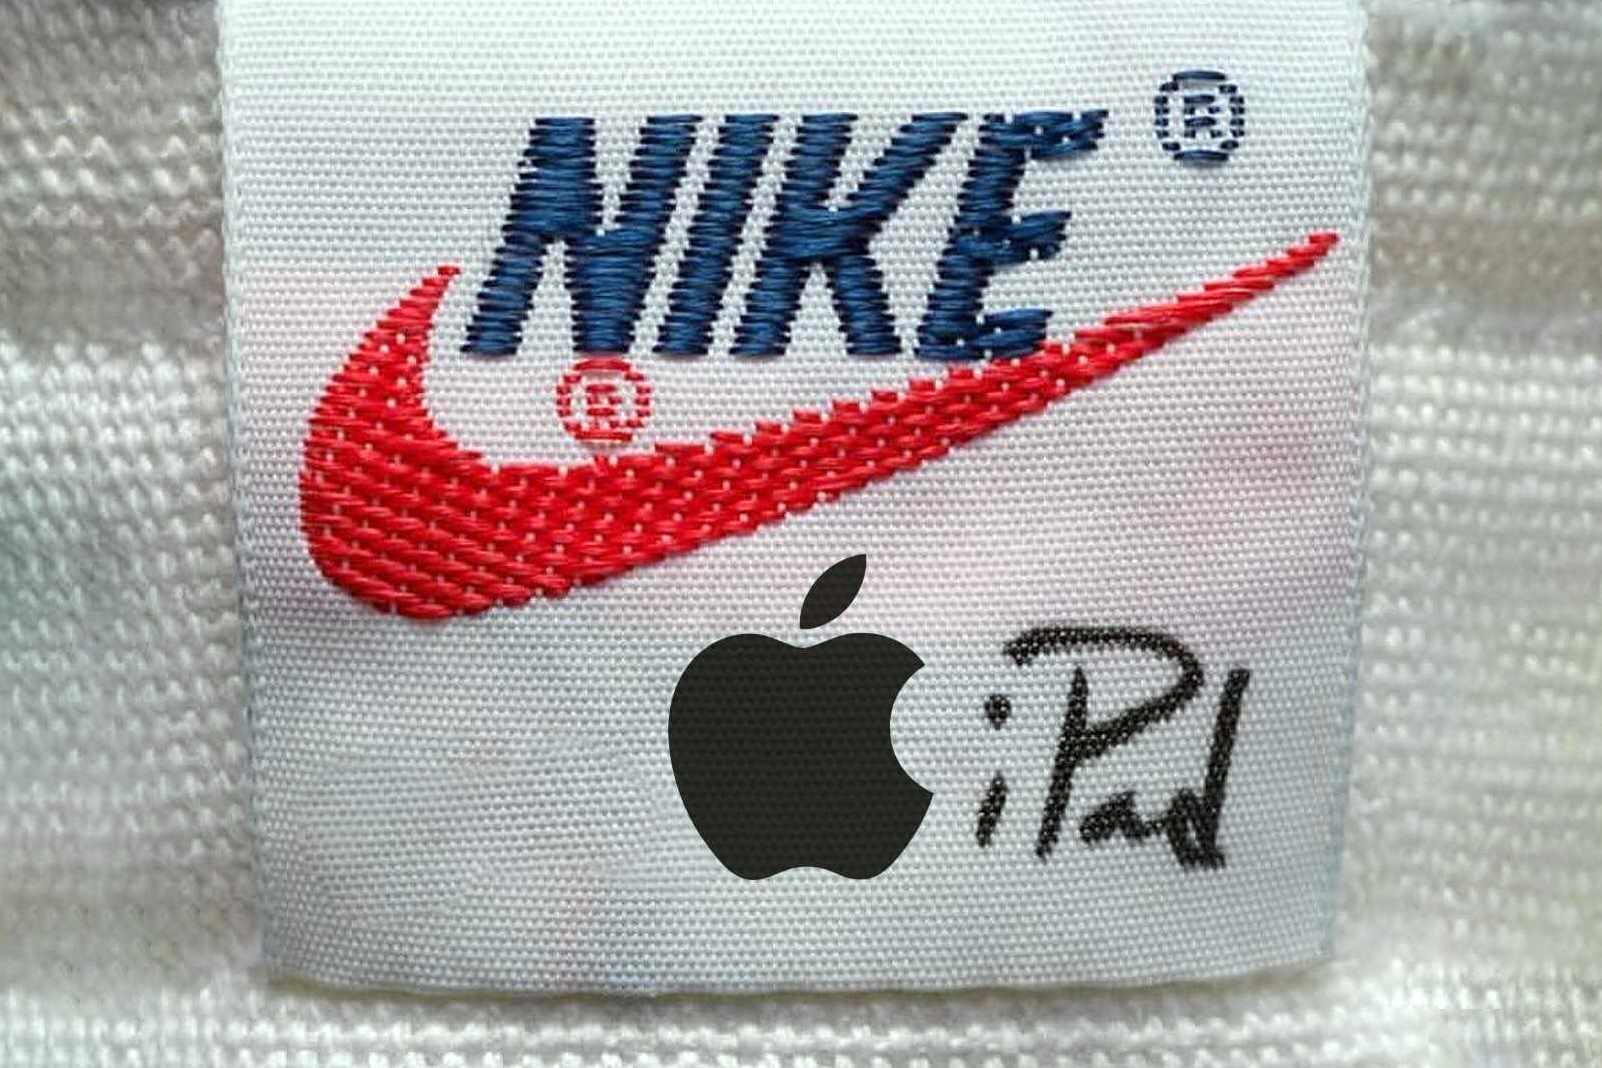 Tim Cook's Apple Nike Air Max sneaker designed with Nike By You